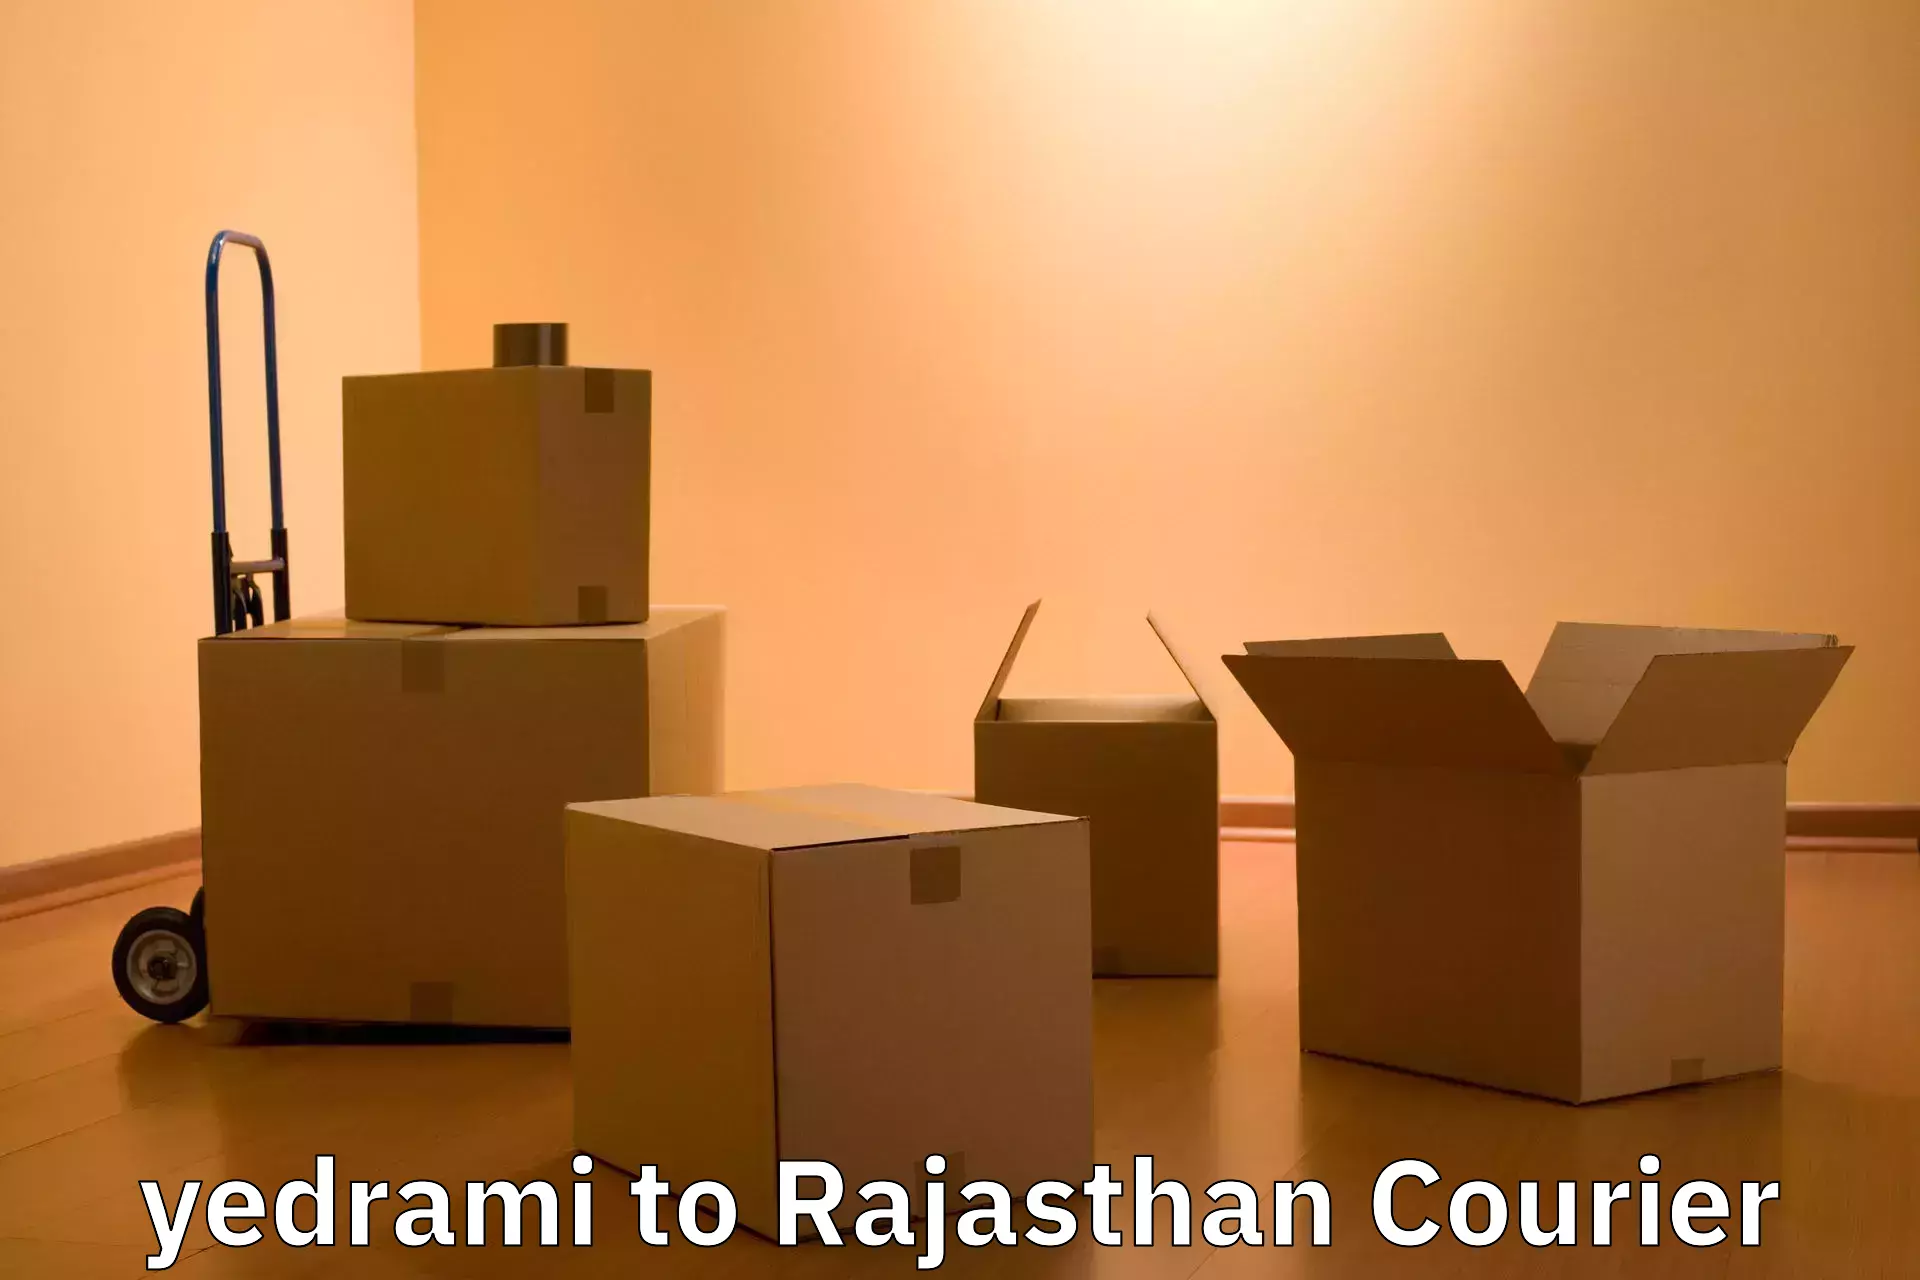 Personal effects shipping yedrami to Rajasthan